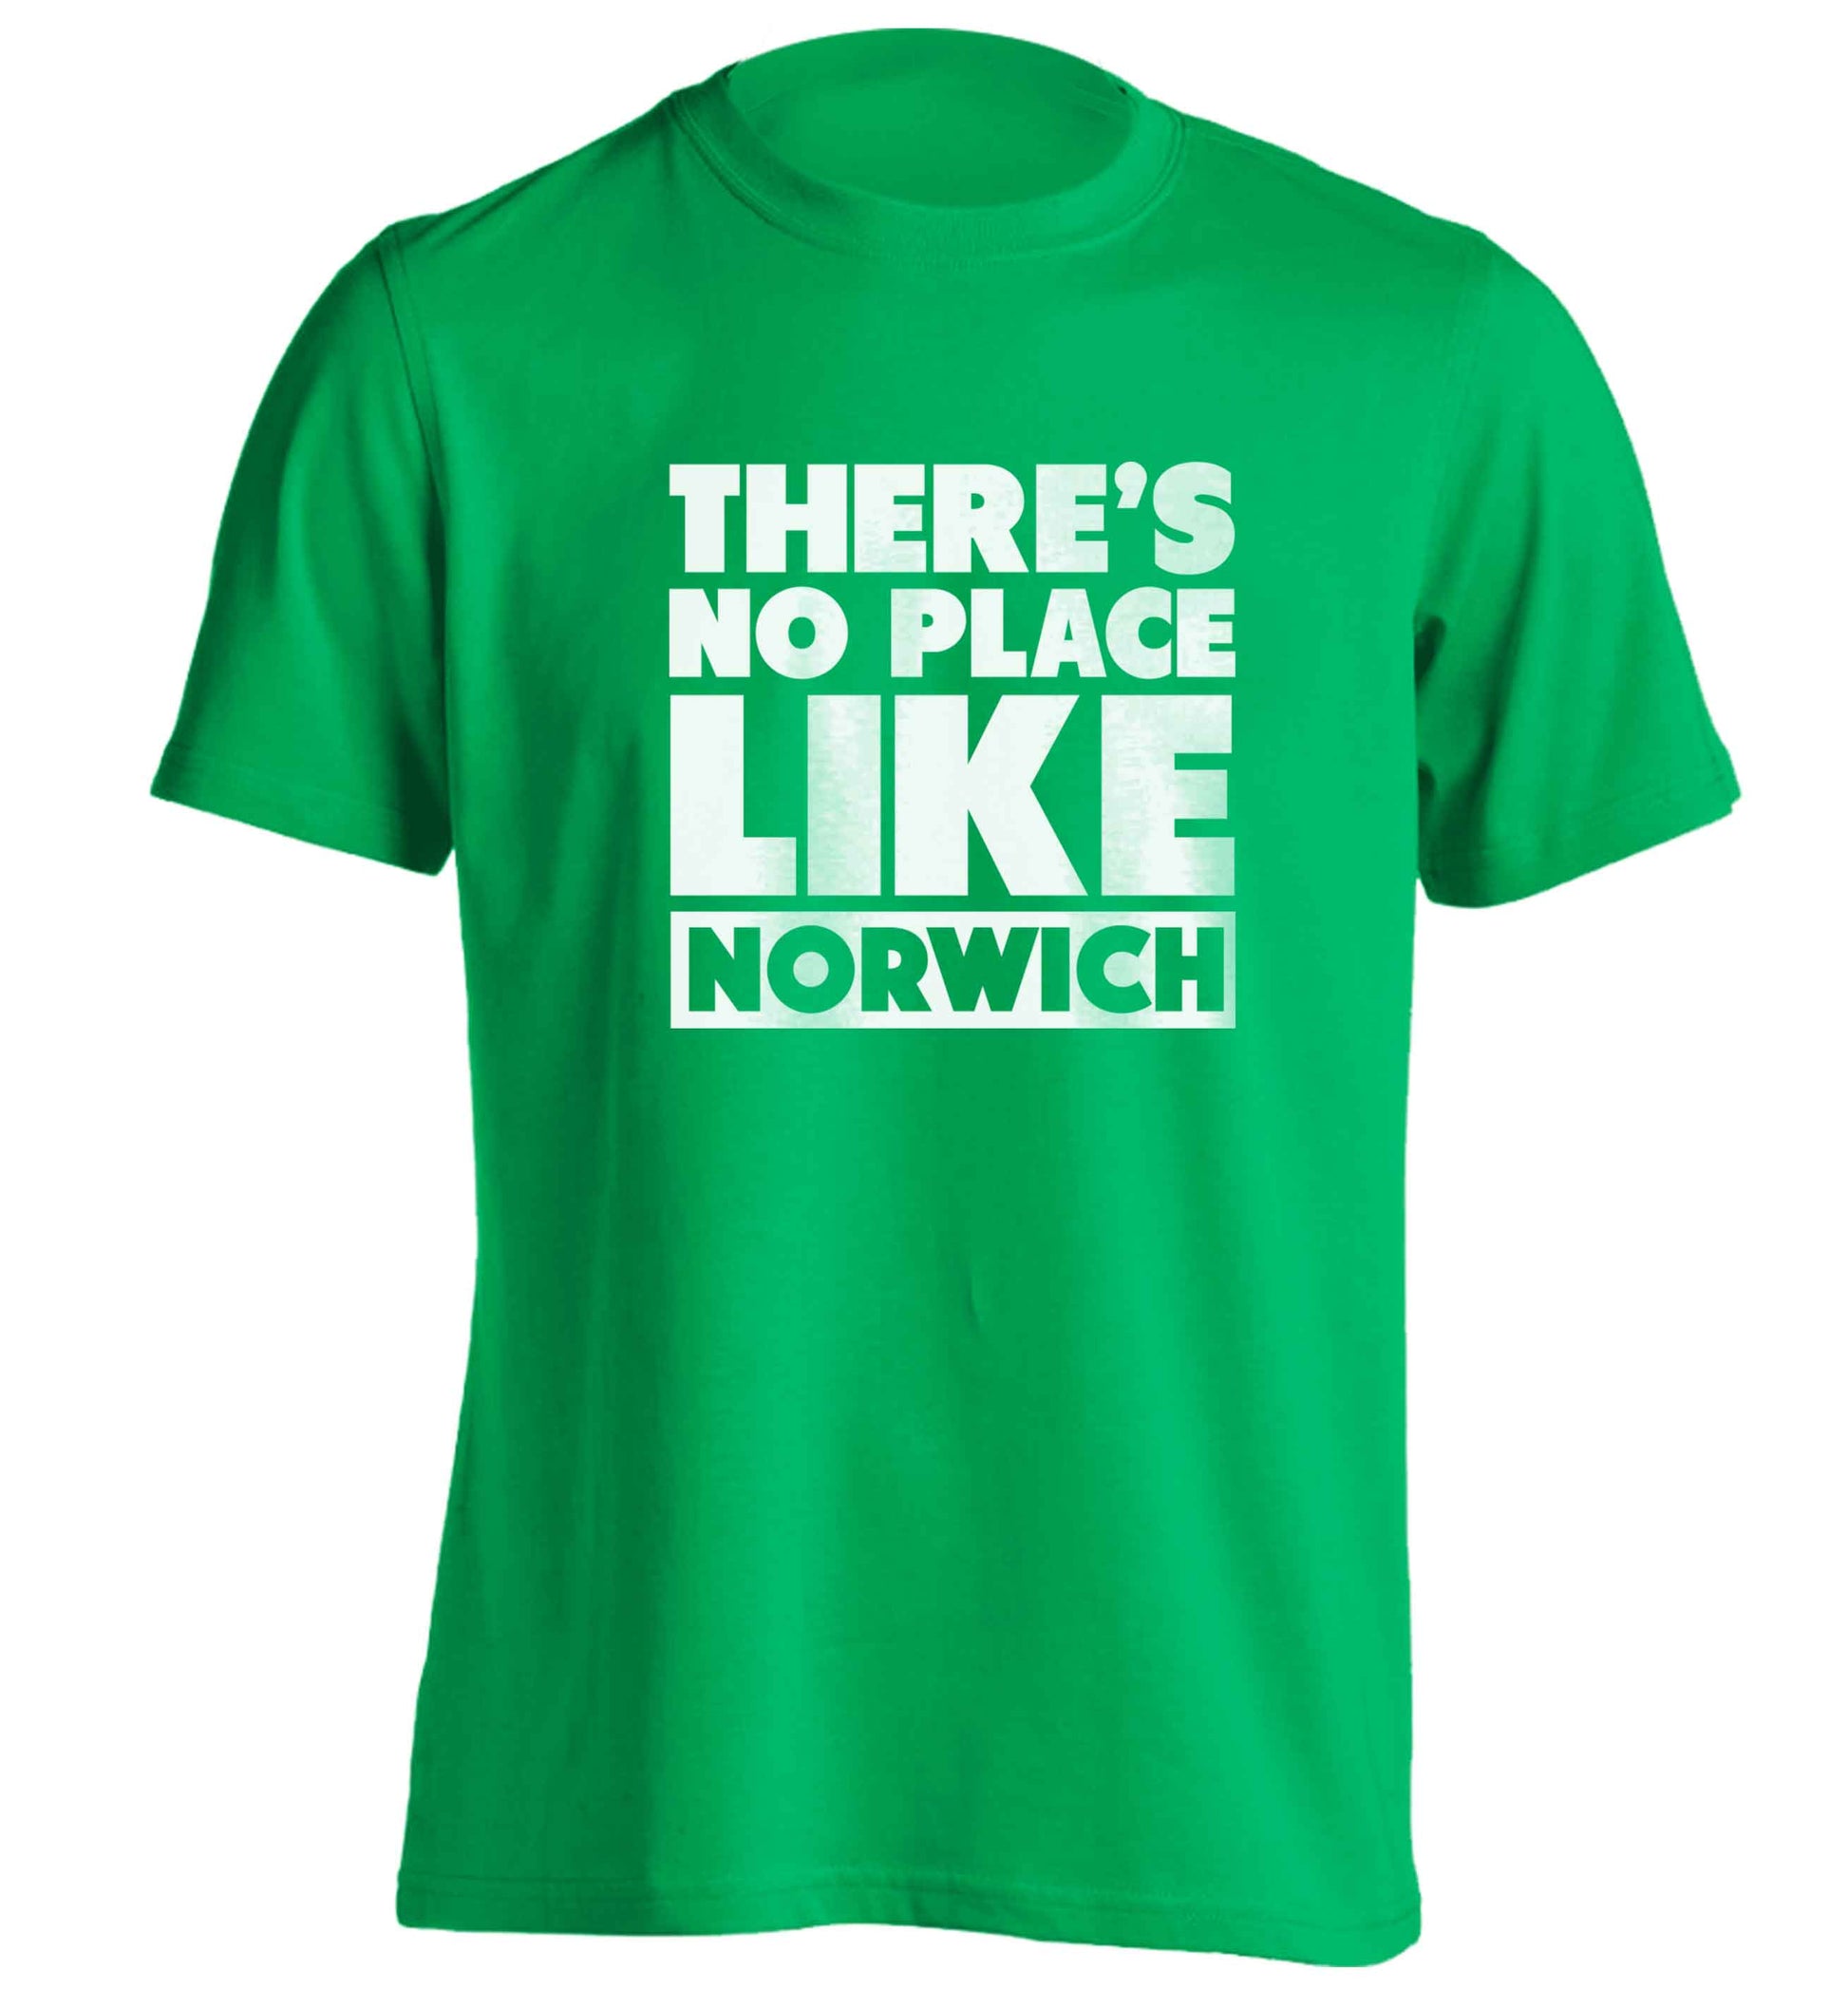 There's no place like Norwich adults unisex green Tshirt 2XL